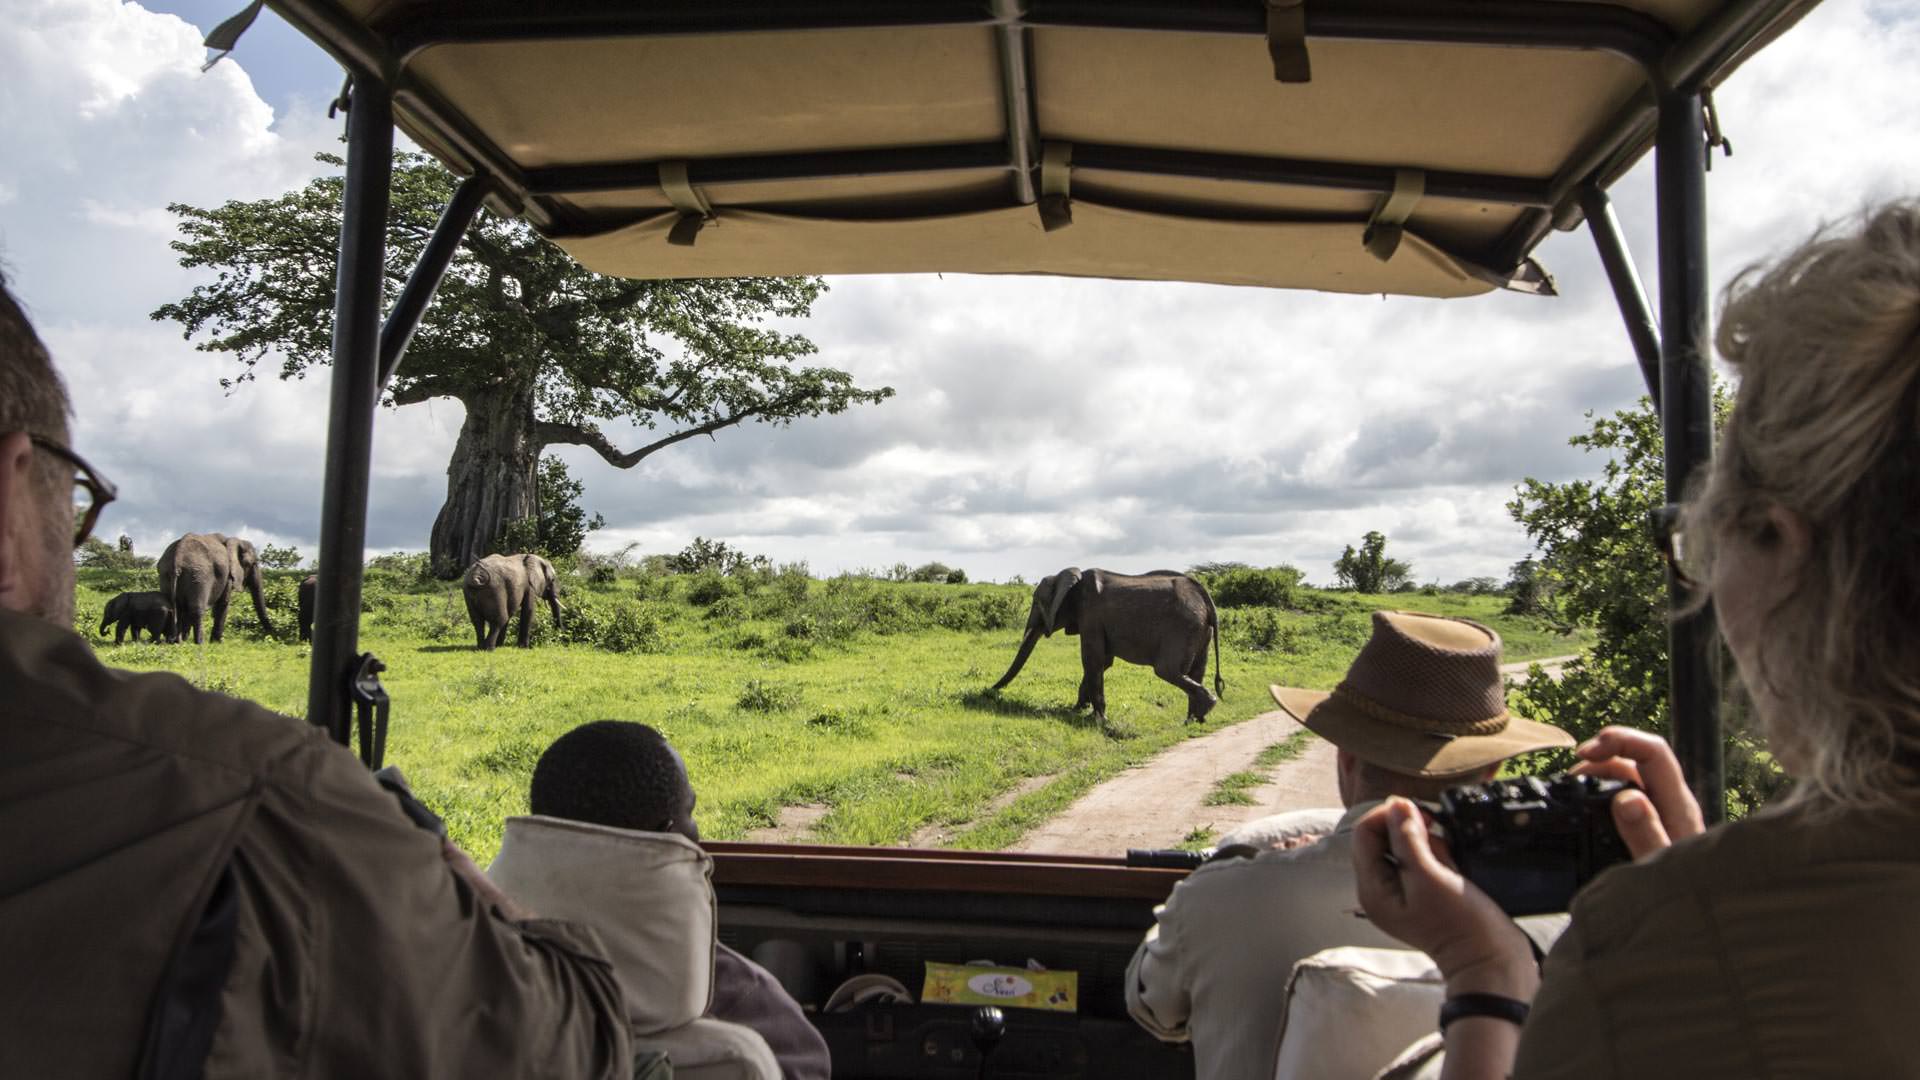 Game drive in open vehicle